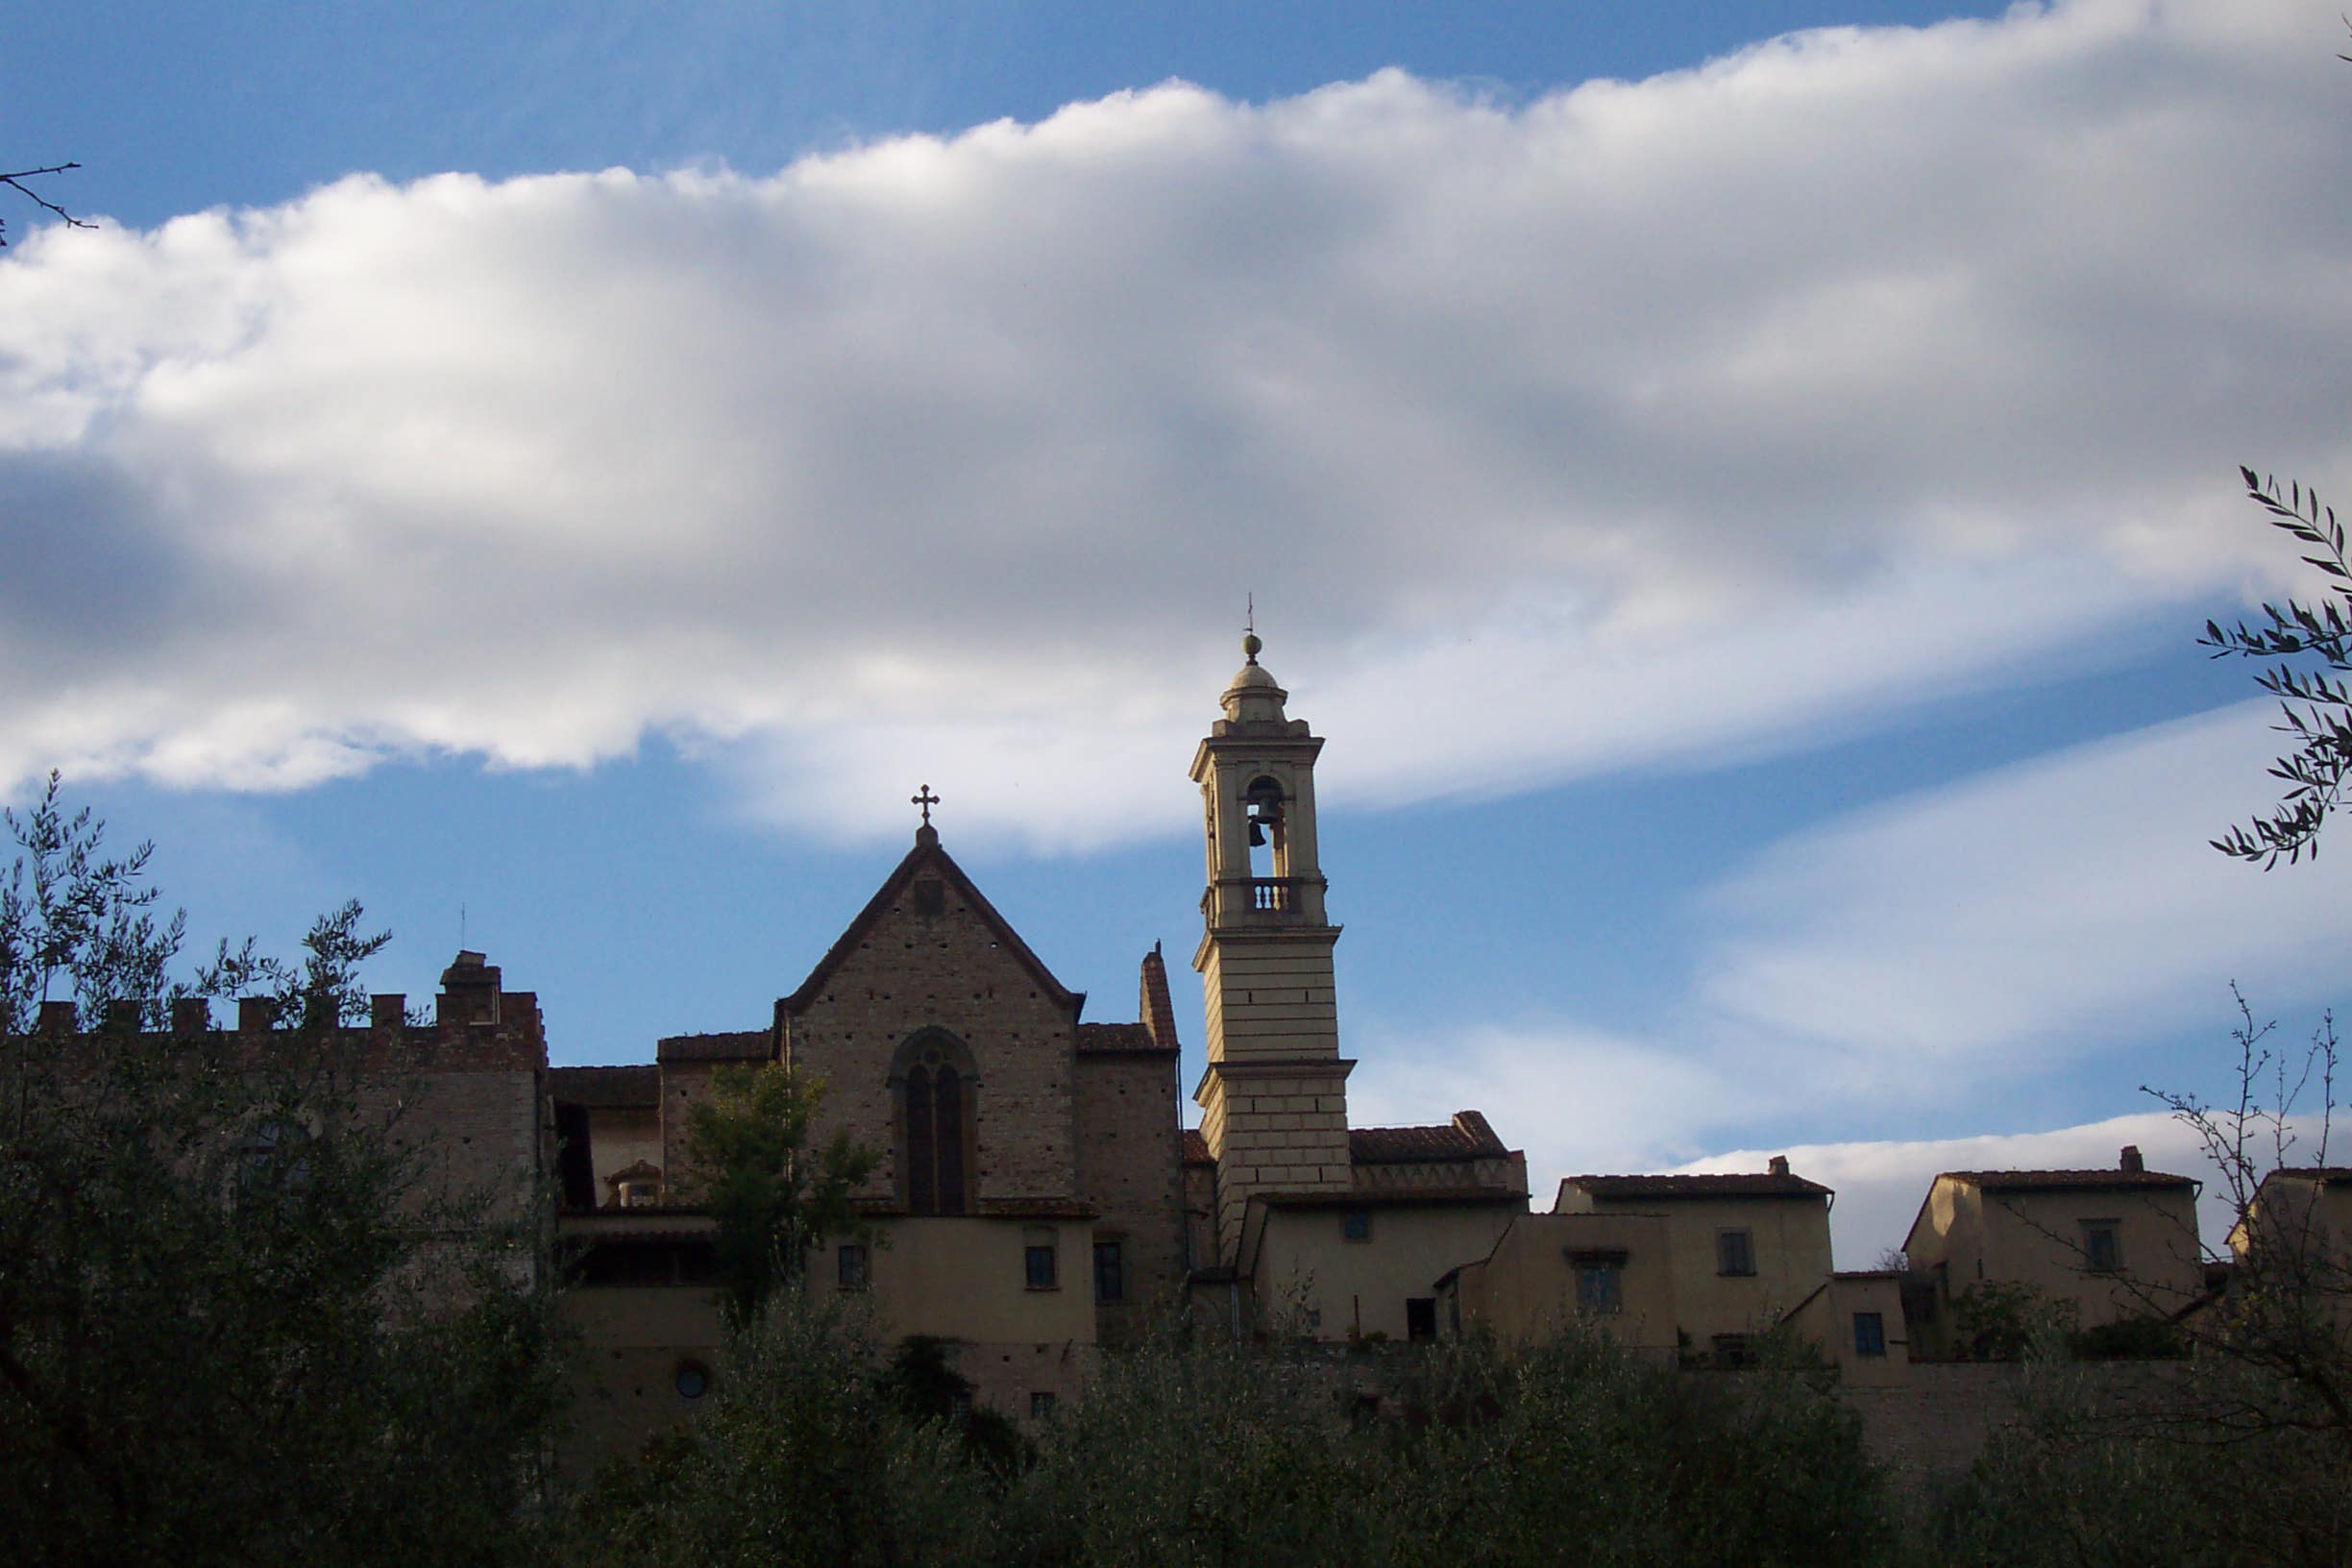 A link to information on the Certosa.